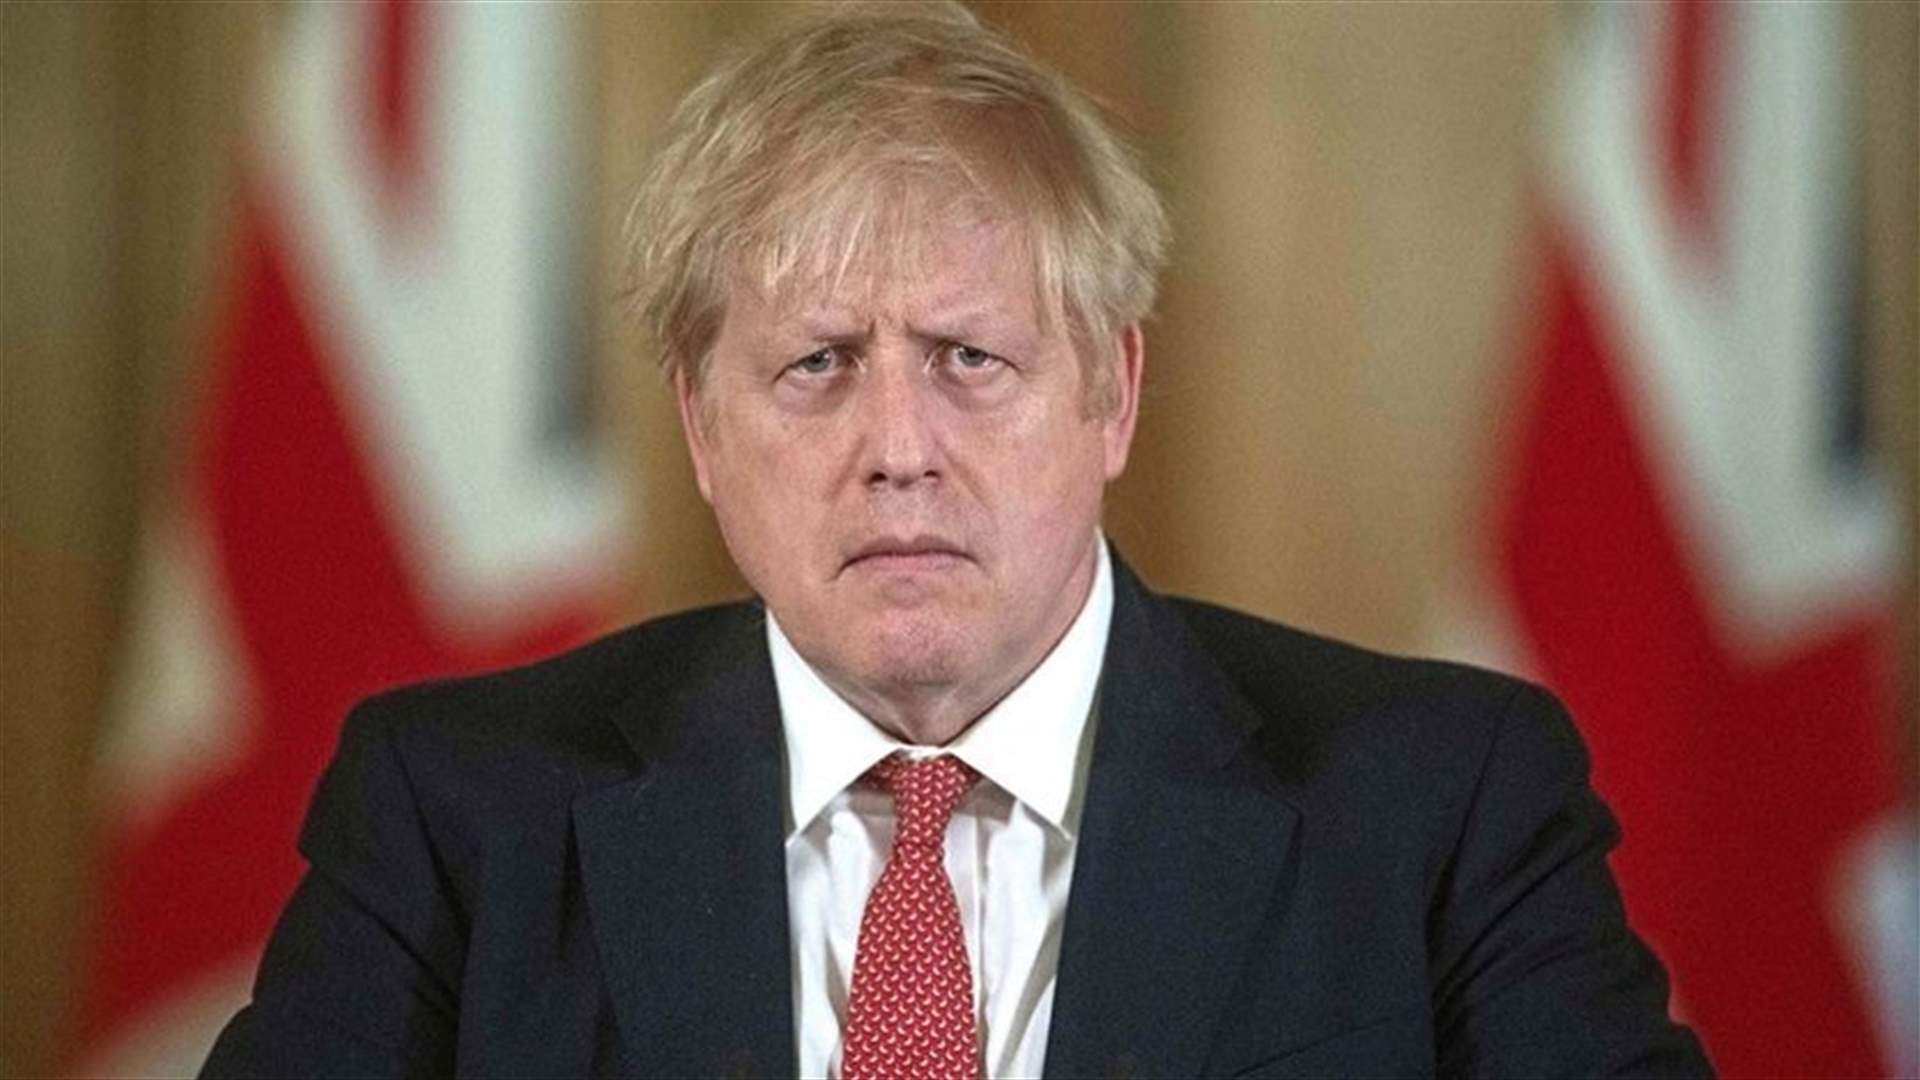 UK PM Johnson &#39;stable&#39; in intensive care, needed oxygen after COVID-19 symptoms worsened